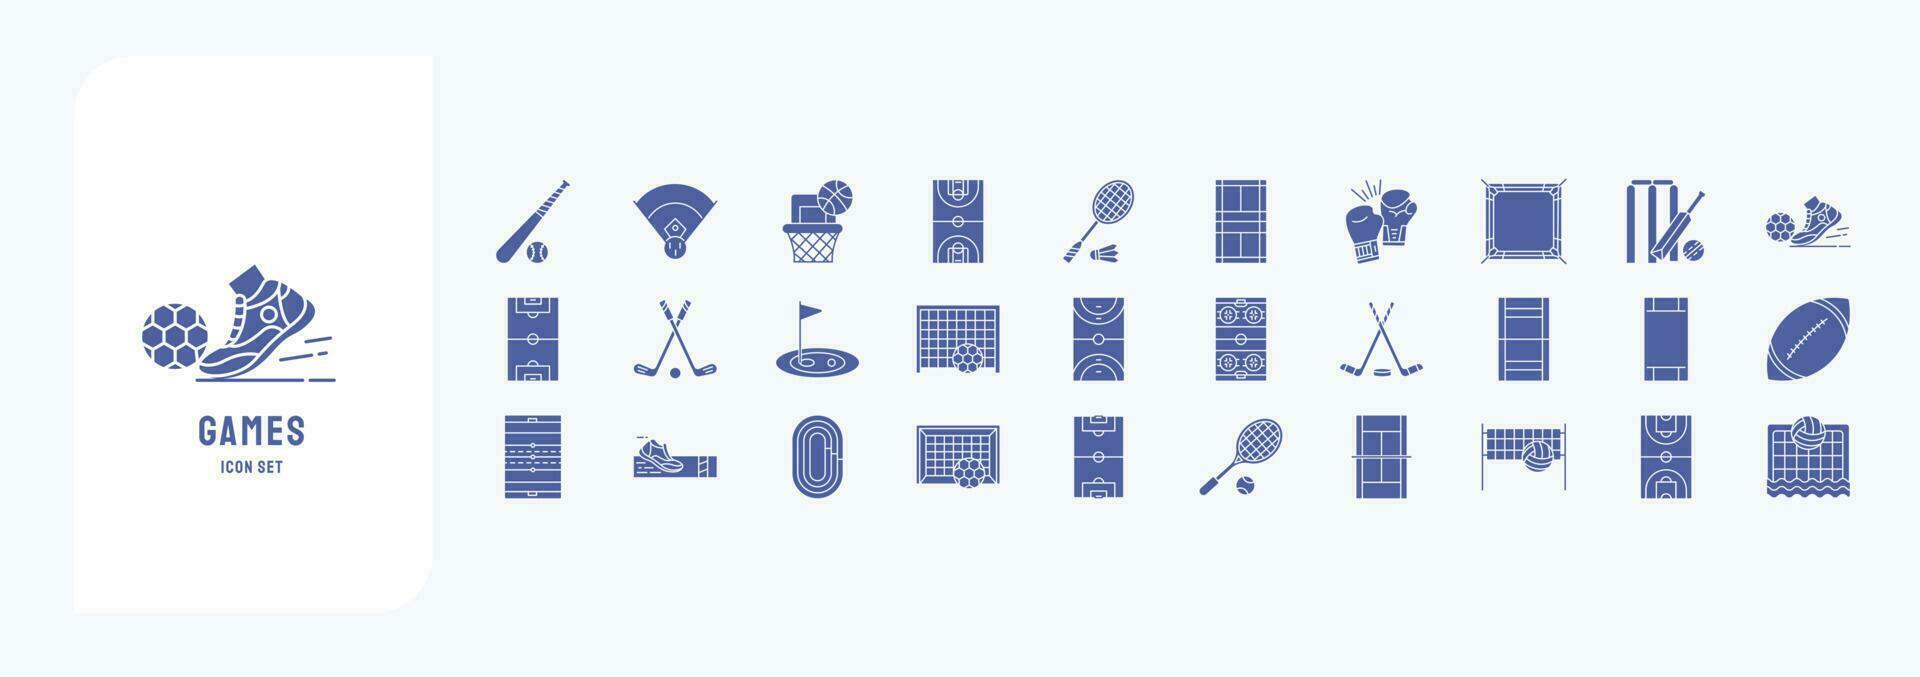 Collection of icons related to Stadiums and Games, including icons like Baseball Game, Basketball, Boxing, cricket and more vector